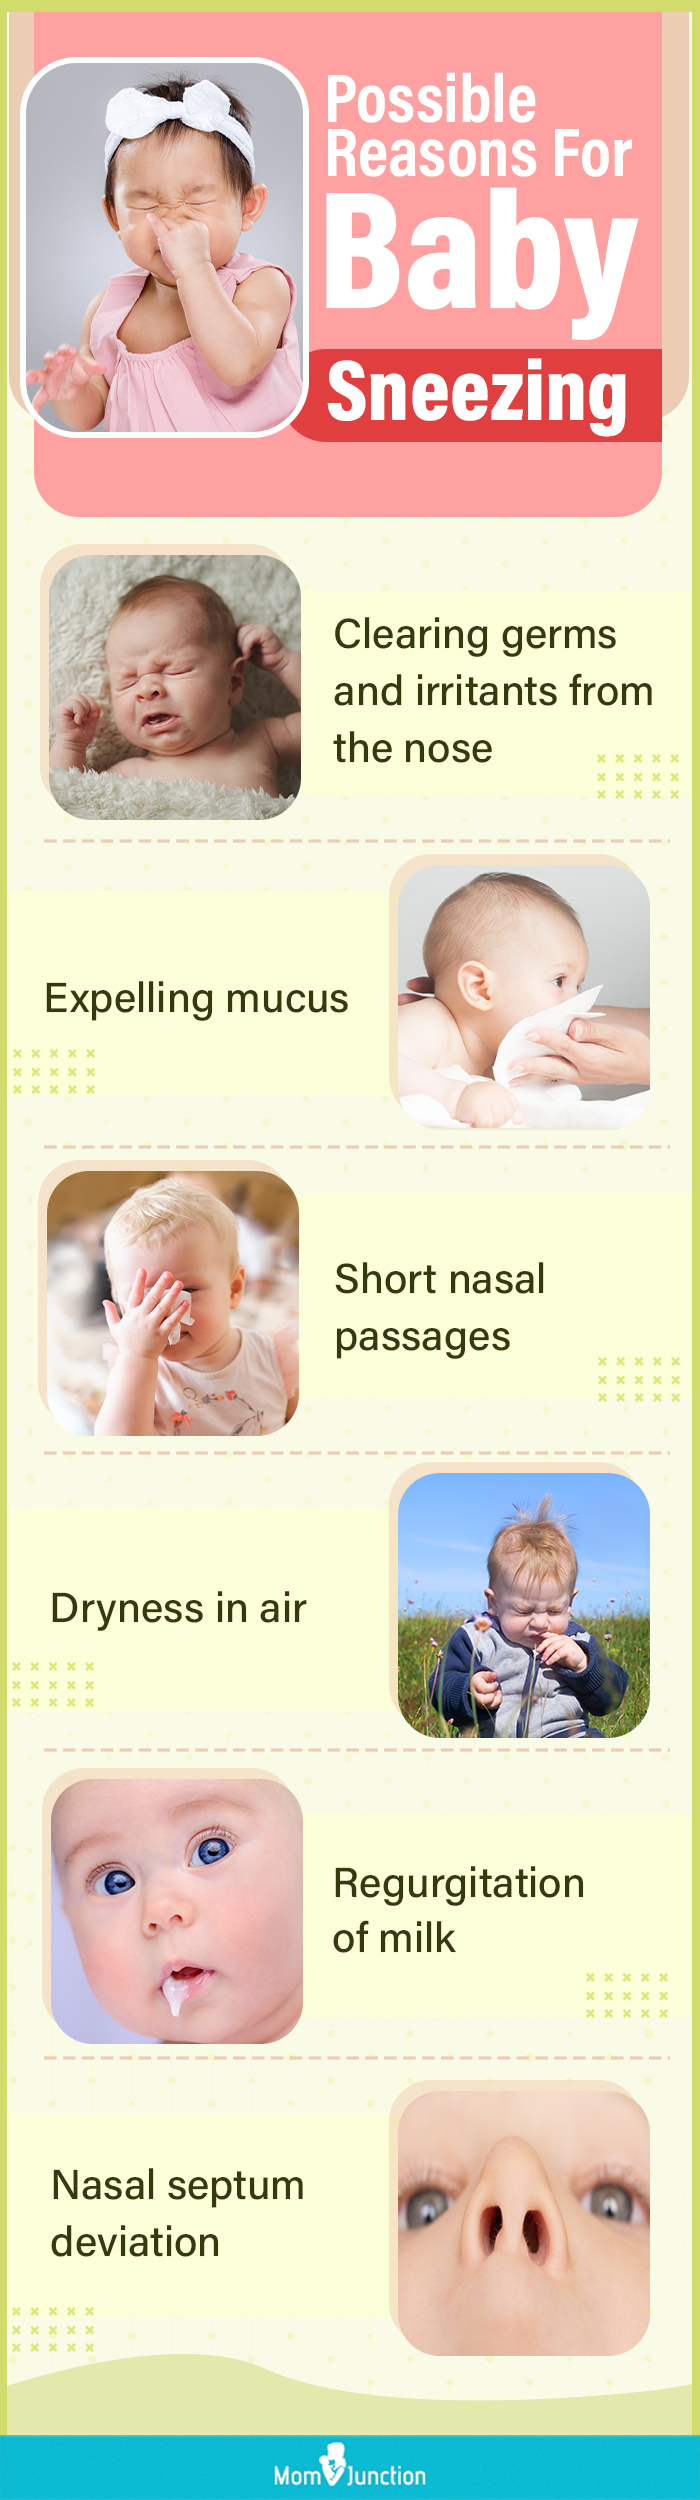 possible reasons for baby sneezing (infographic)